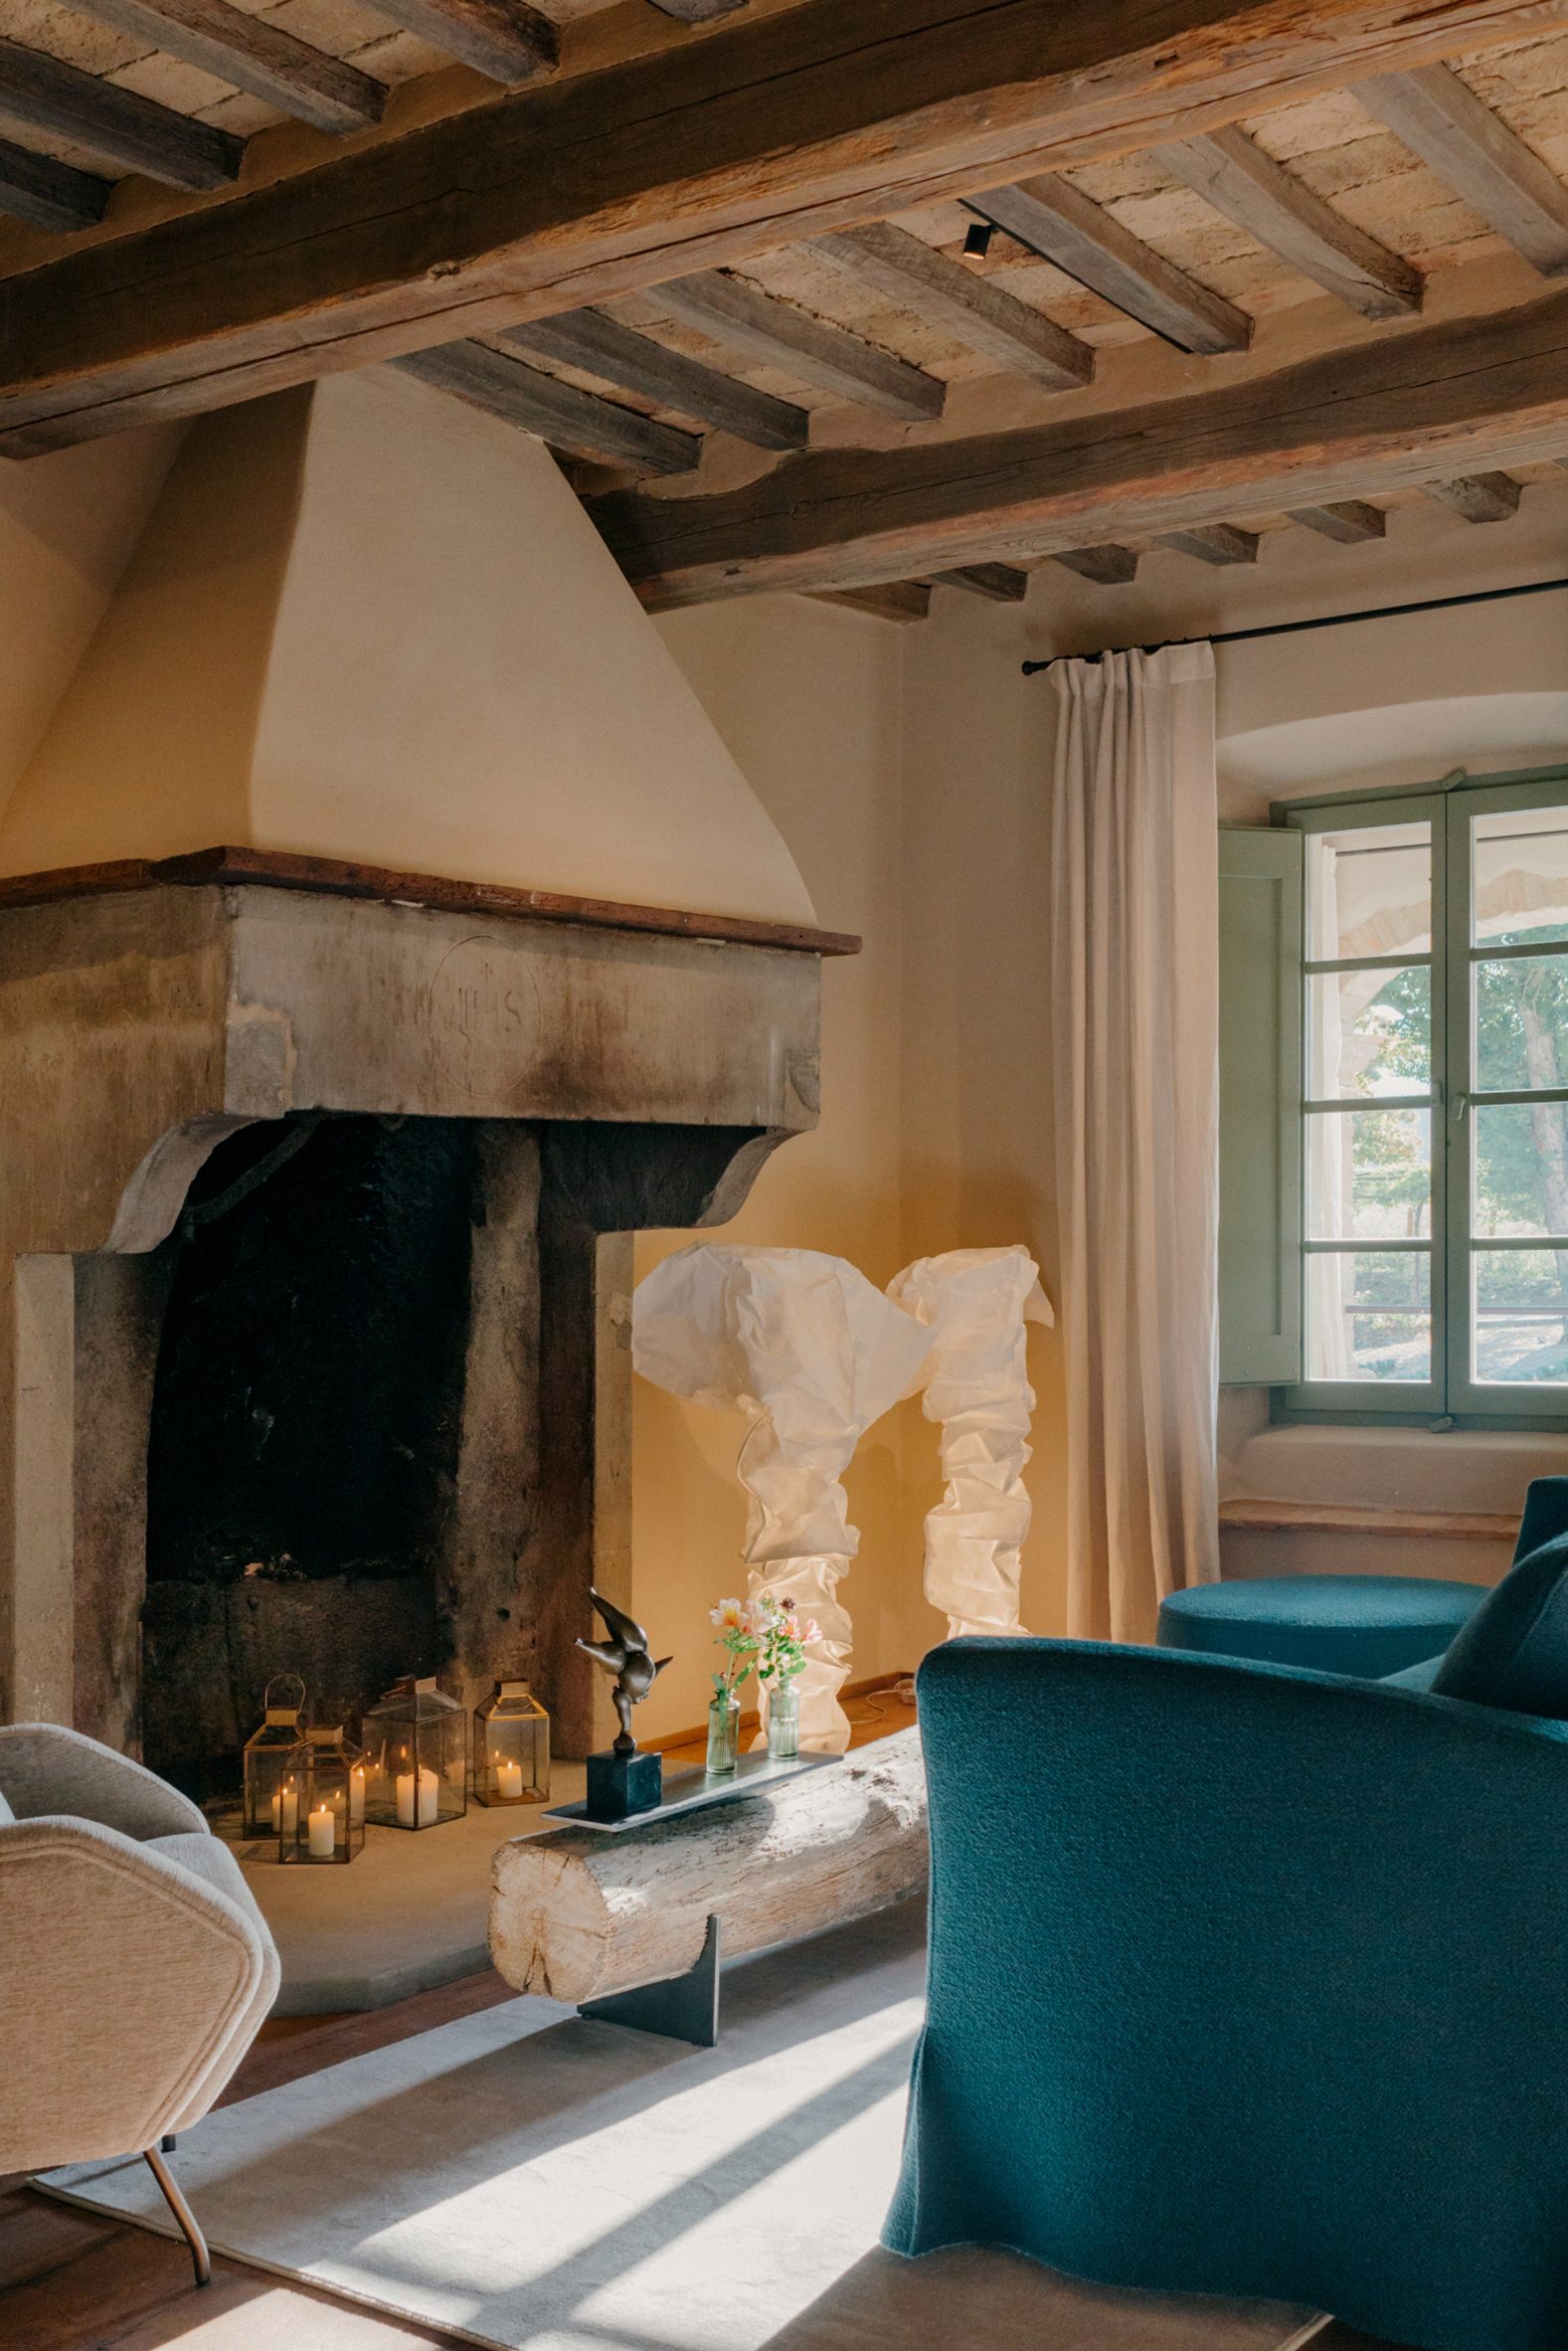 Seating area with fireplace inside Hotel Vocabolo Moscatelli in Umbria by Archiloop